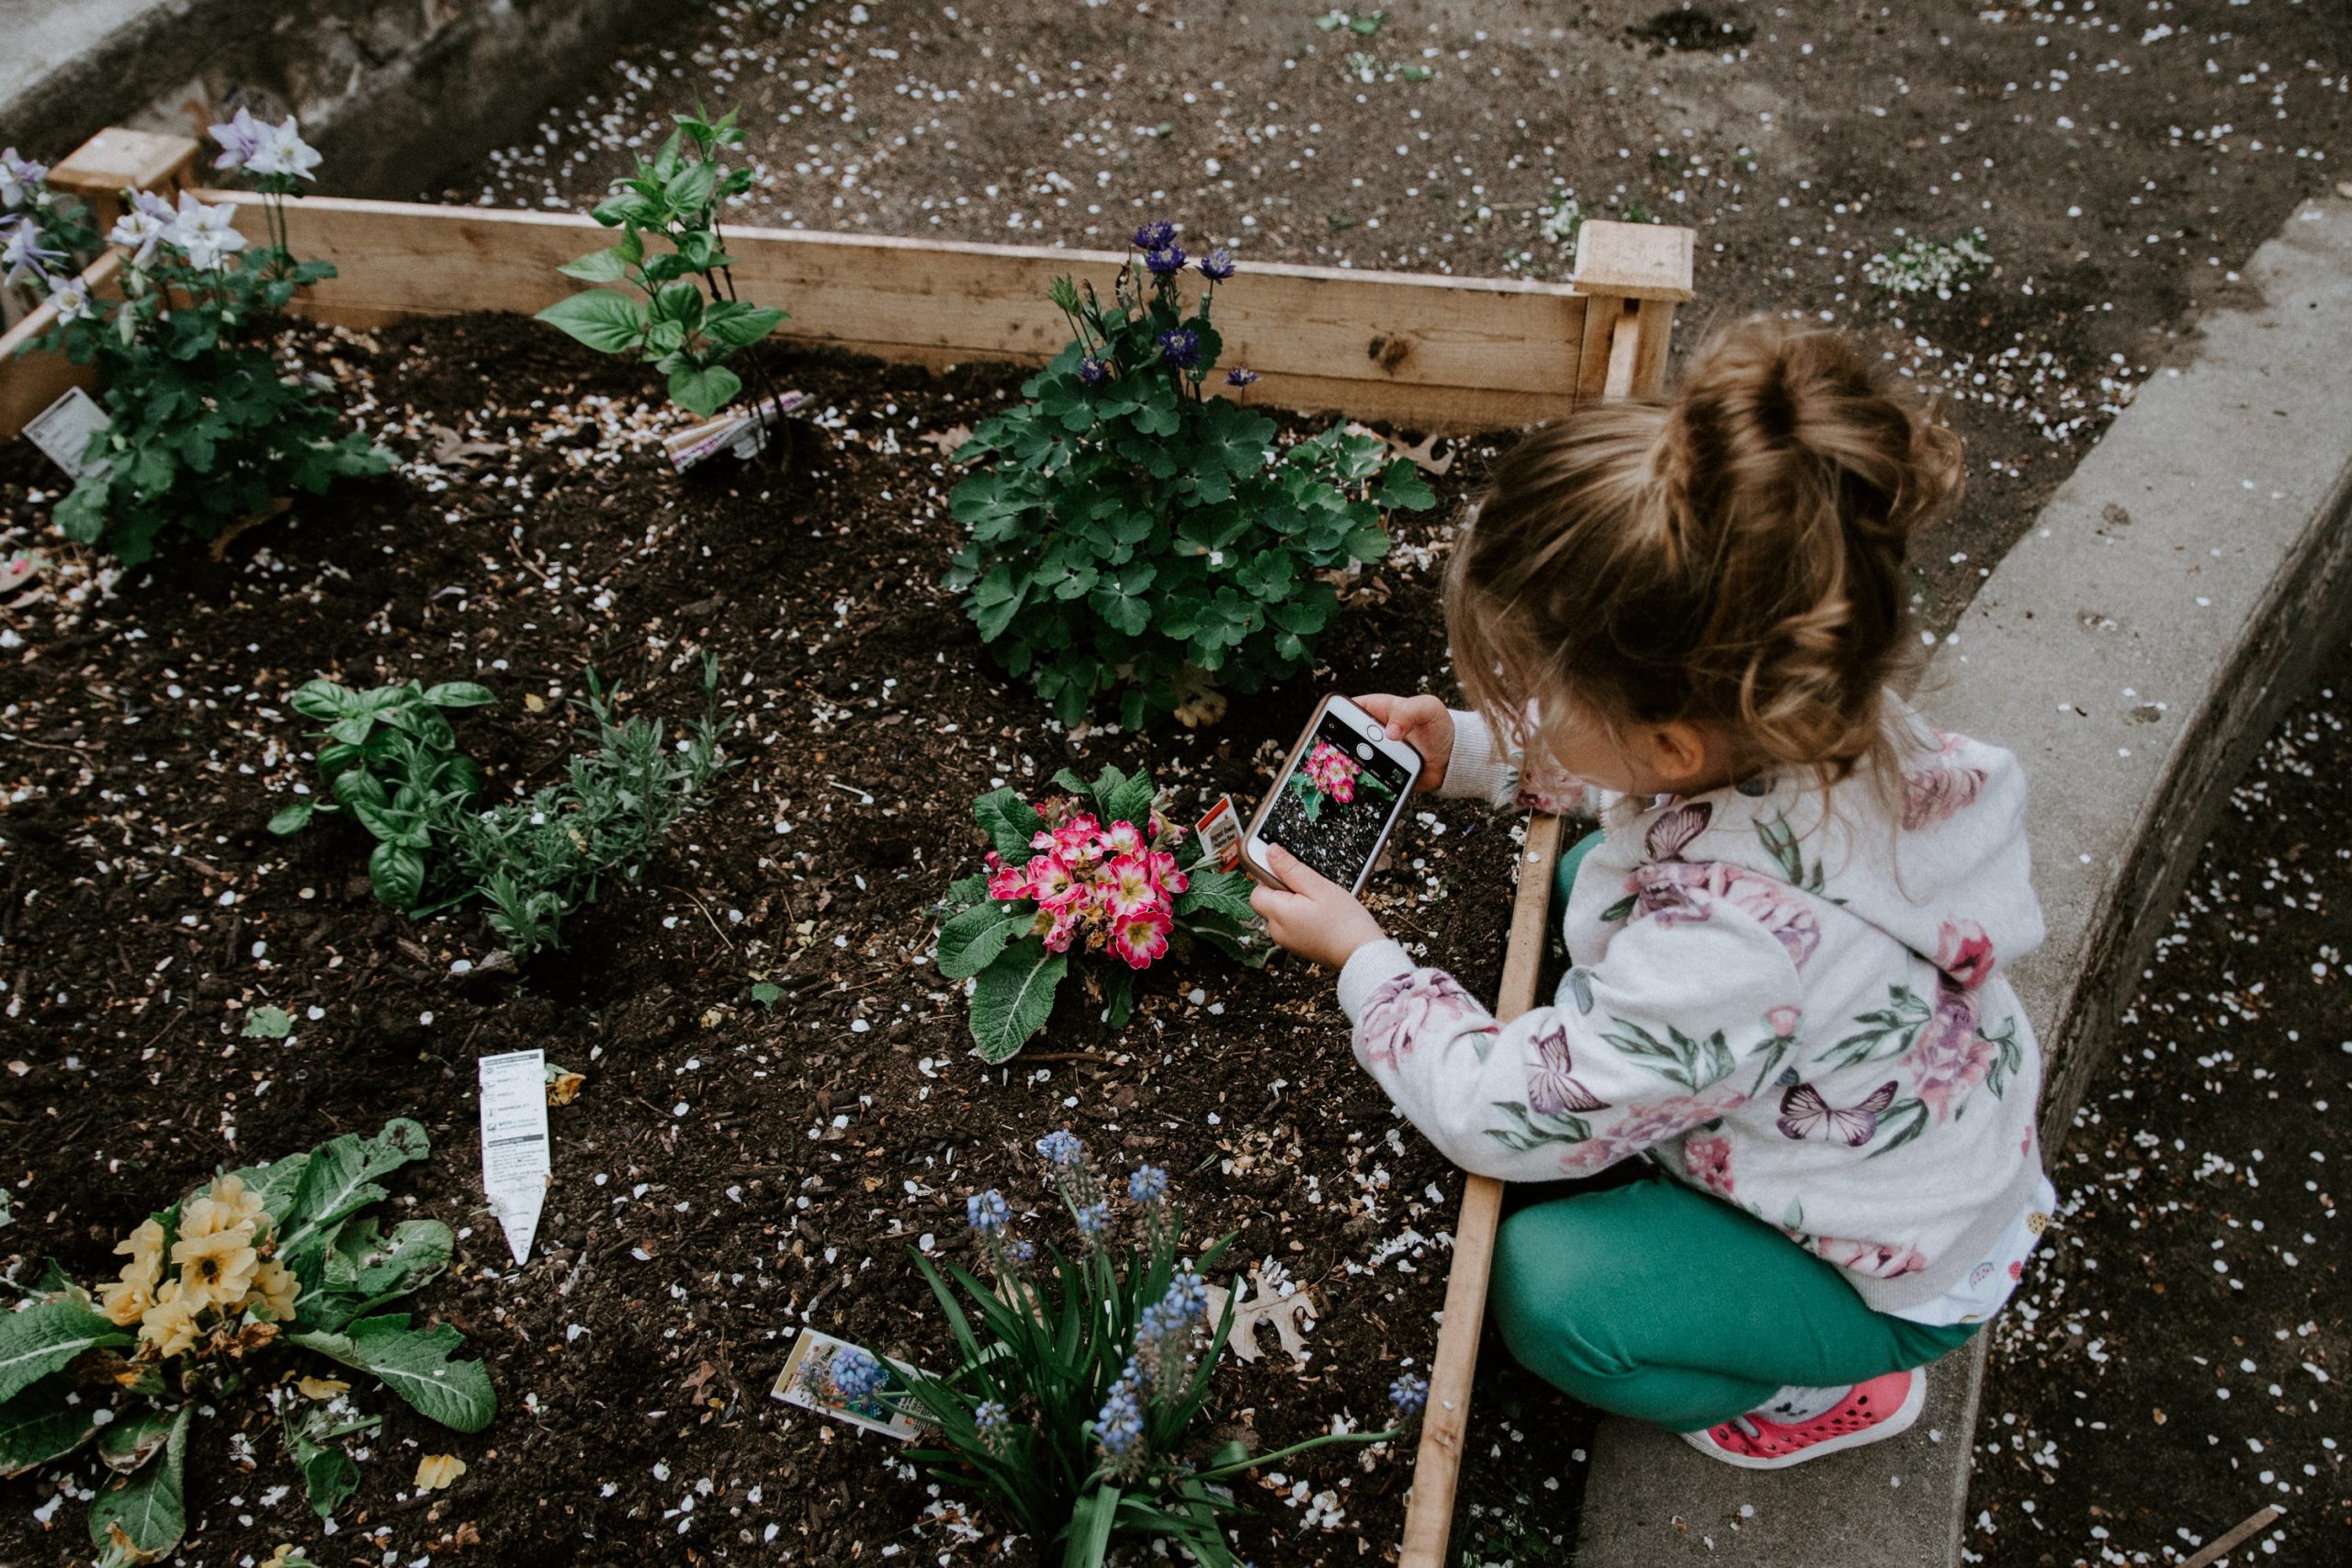 A young child with a smartphone looking at a space where vegetables are growing